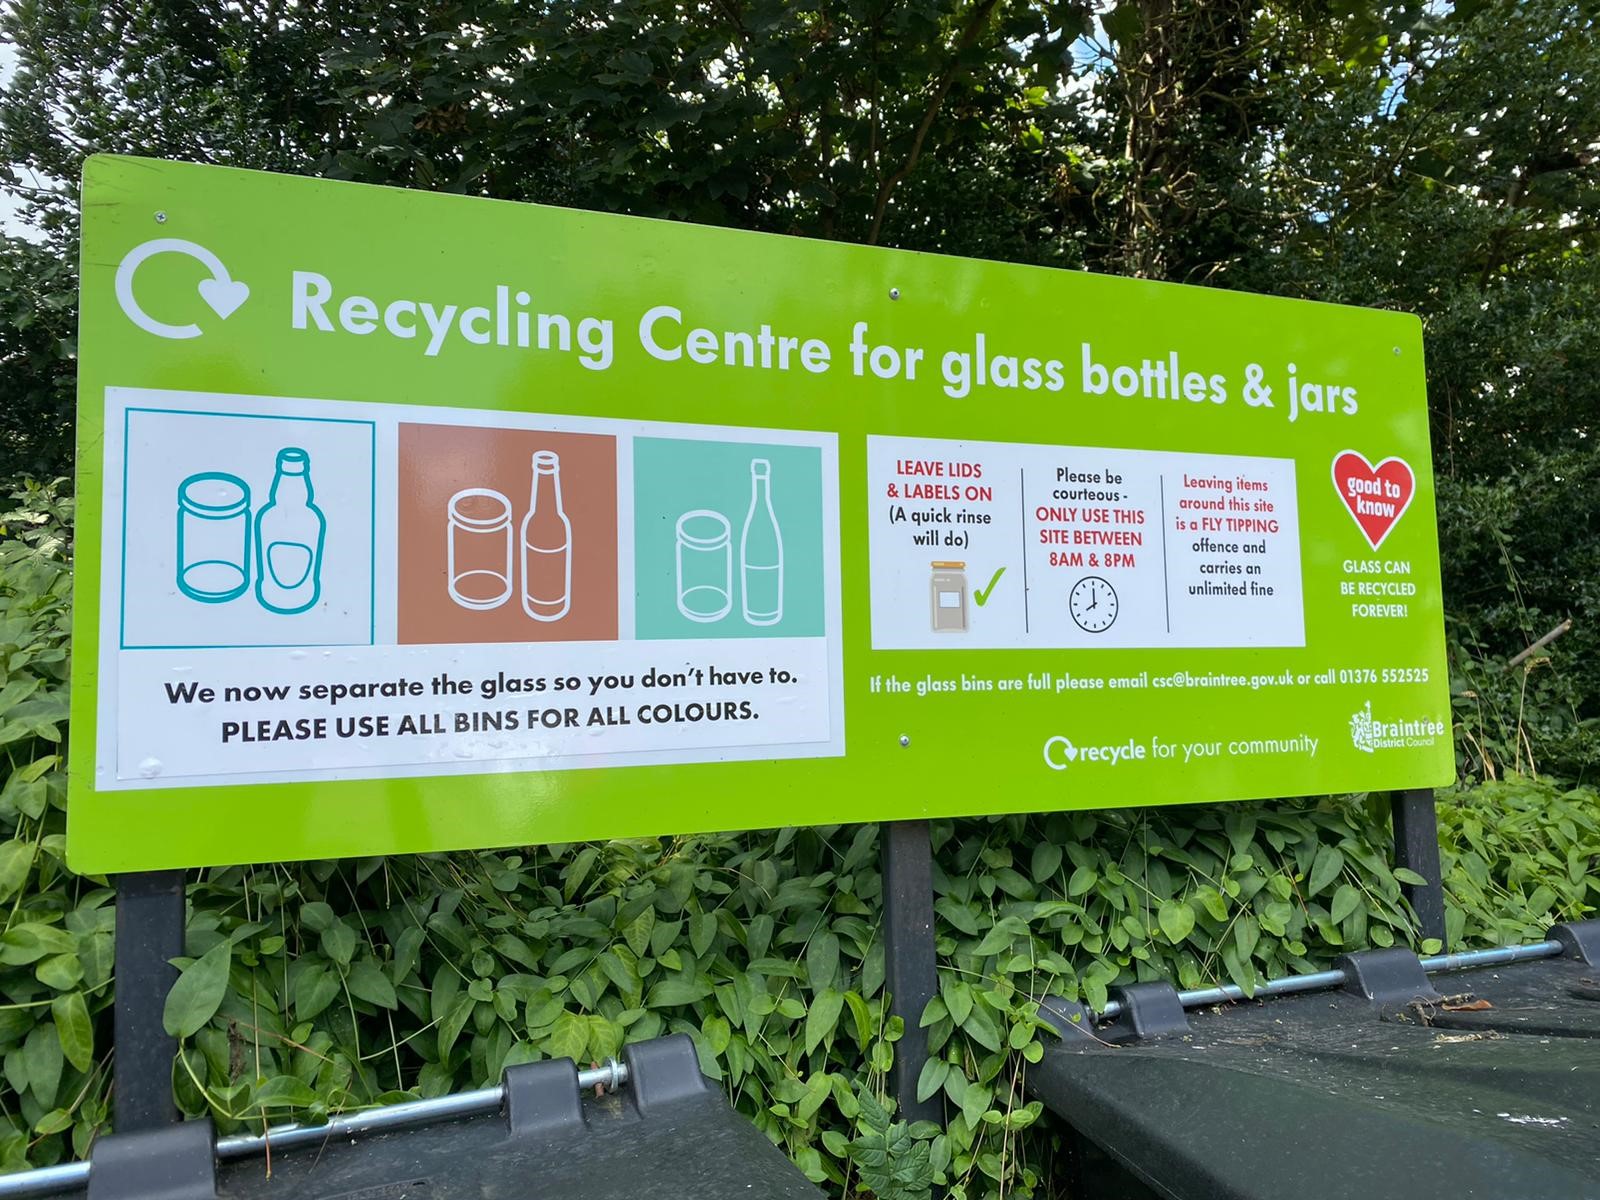 Glass bottles and jars recycling